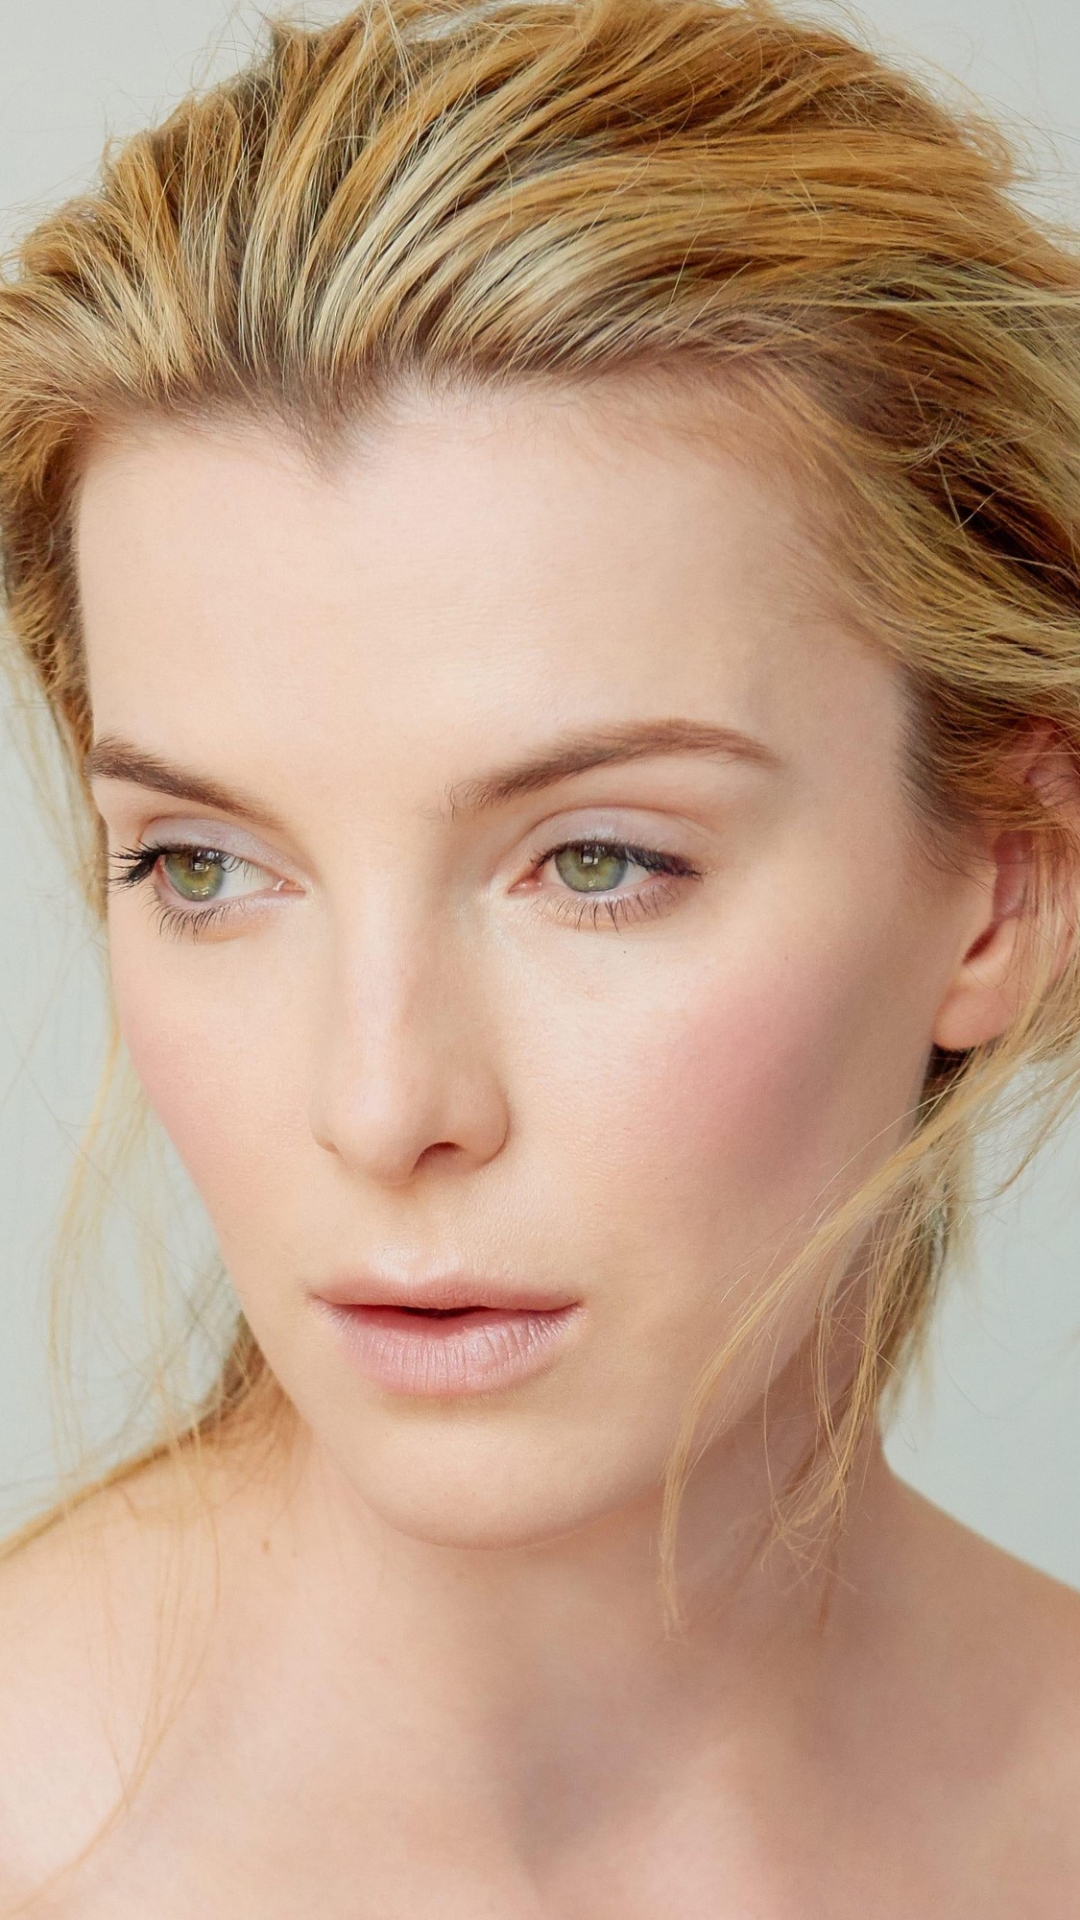 celebrity, betty gilpin, face, american, actress, blonde, green eyes